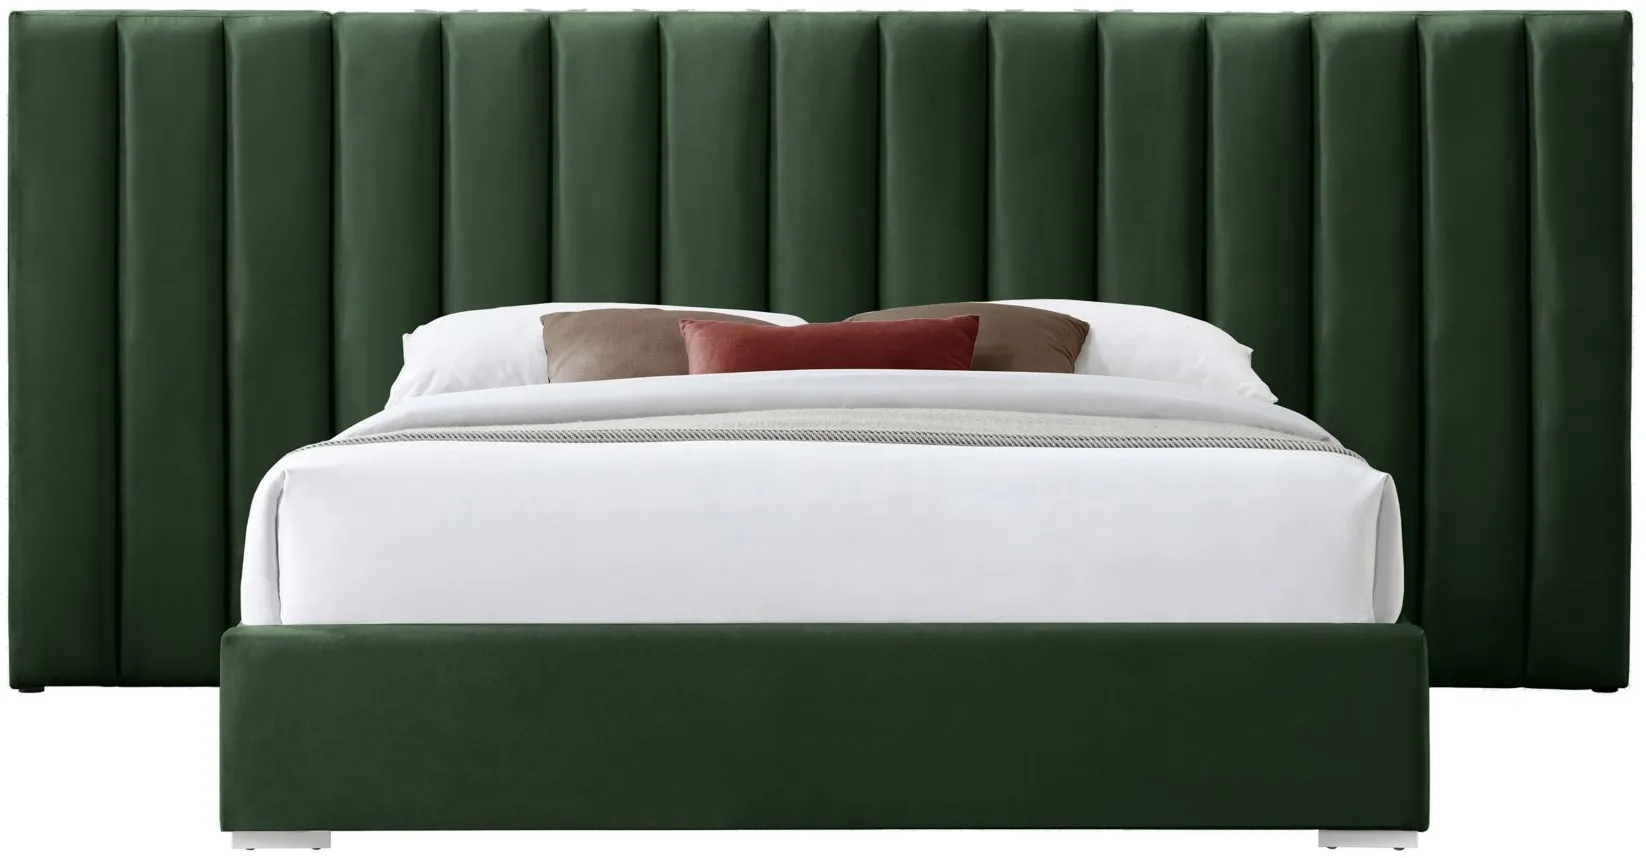 Pablo King Bed in Green by Meridian Furniture